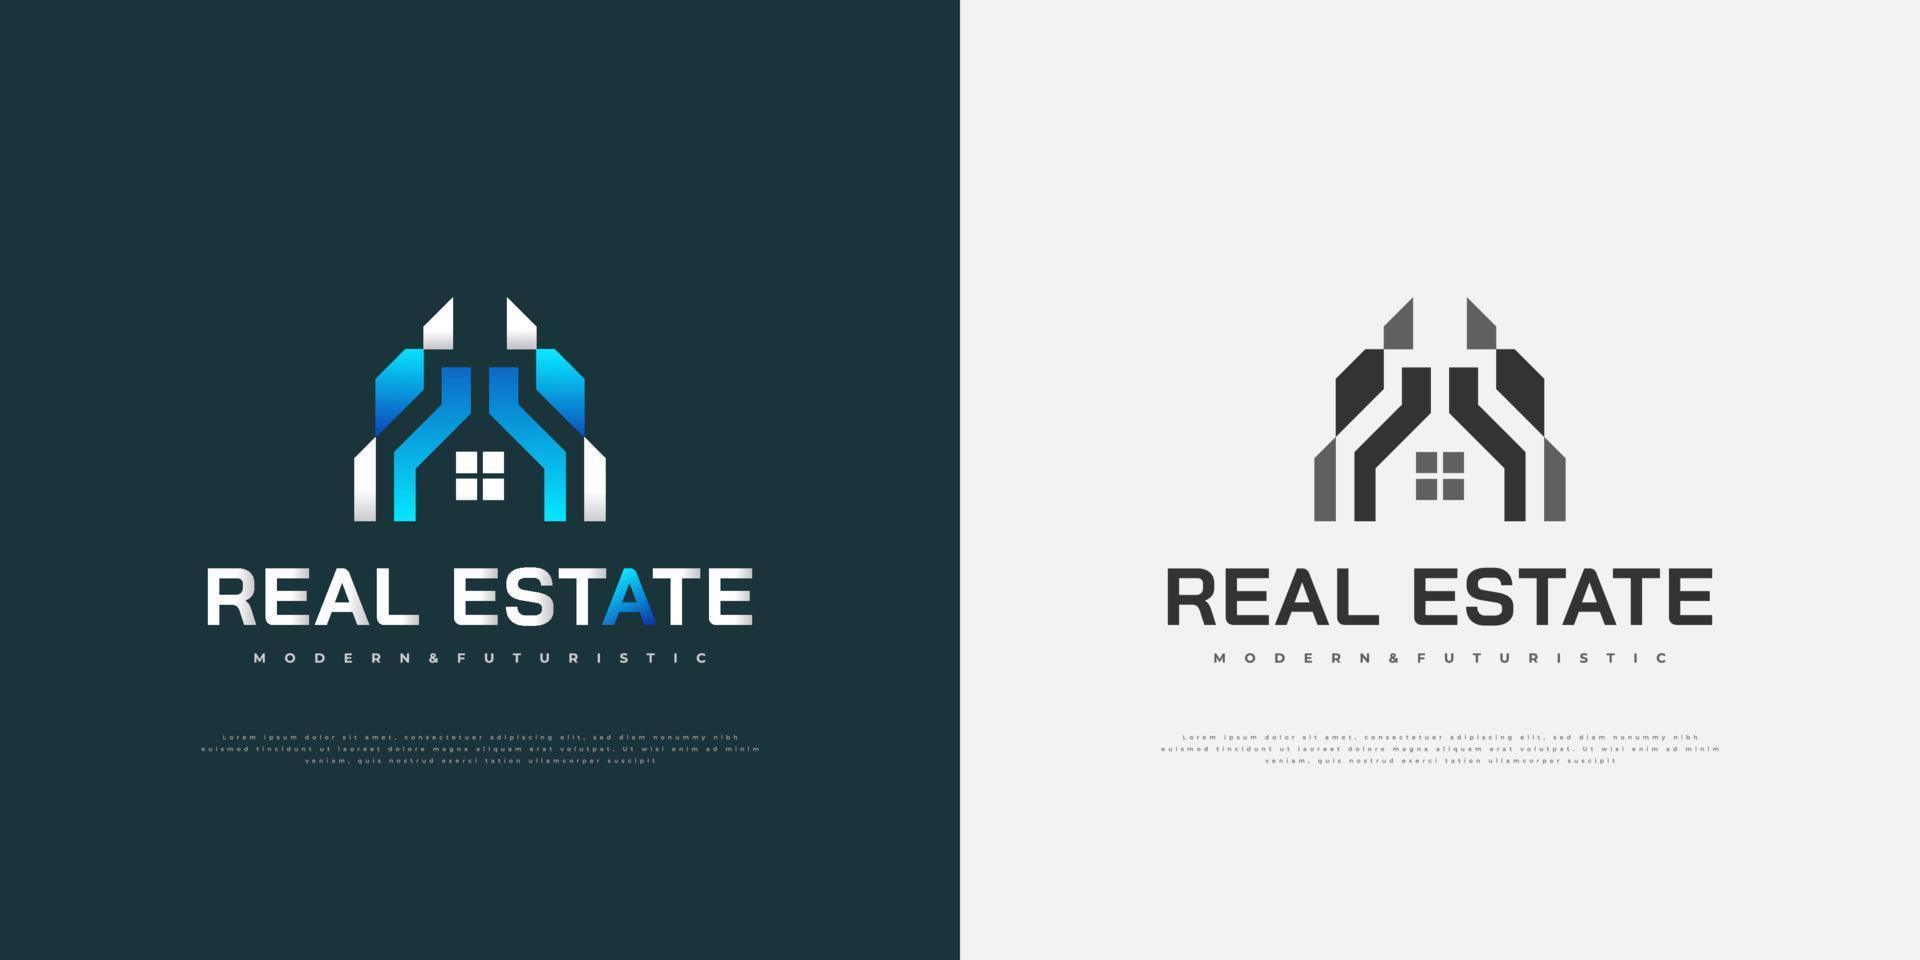 Modern and Futuristic Real Estate Logo Design in White and Blue Gradient vector